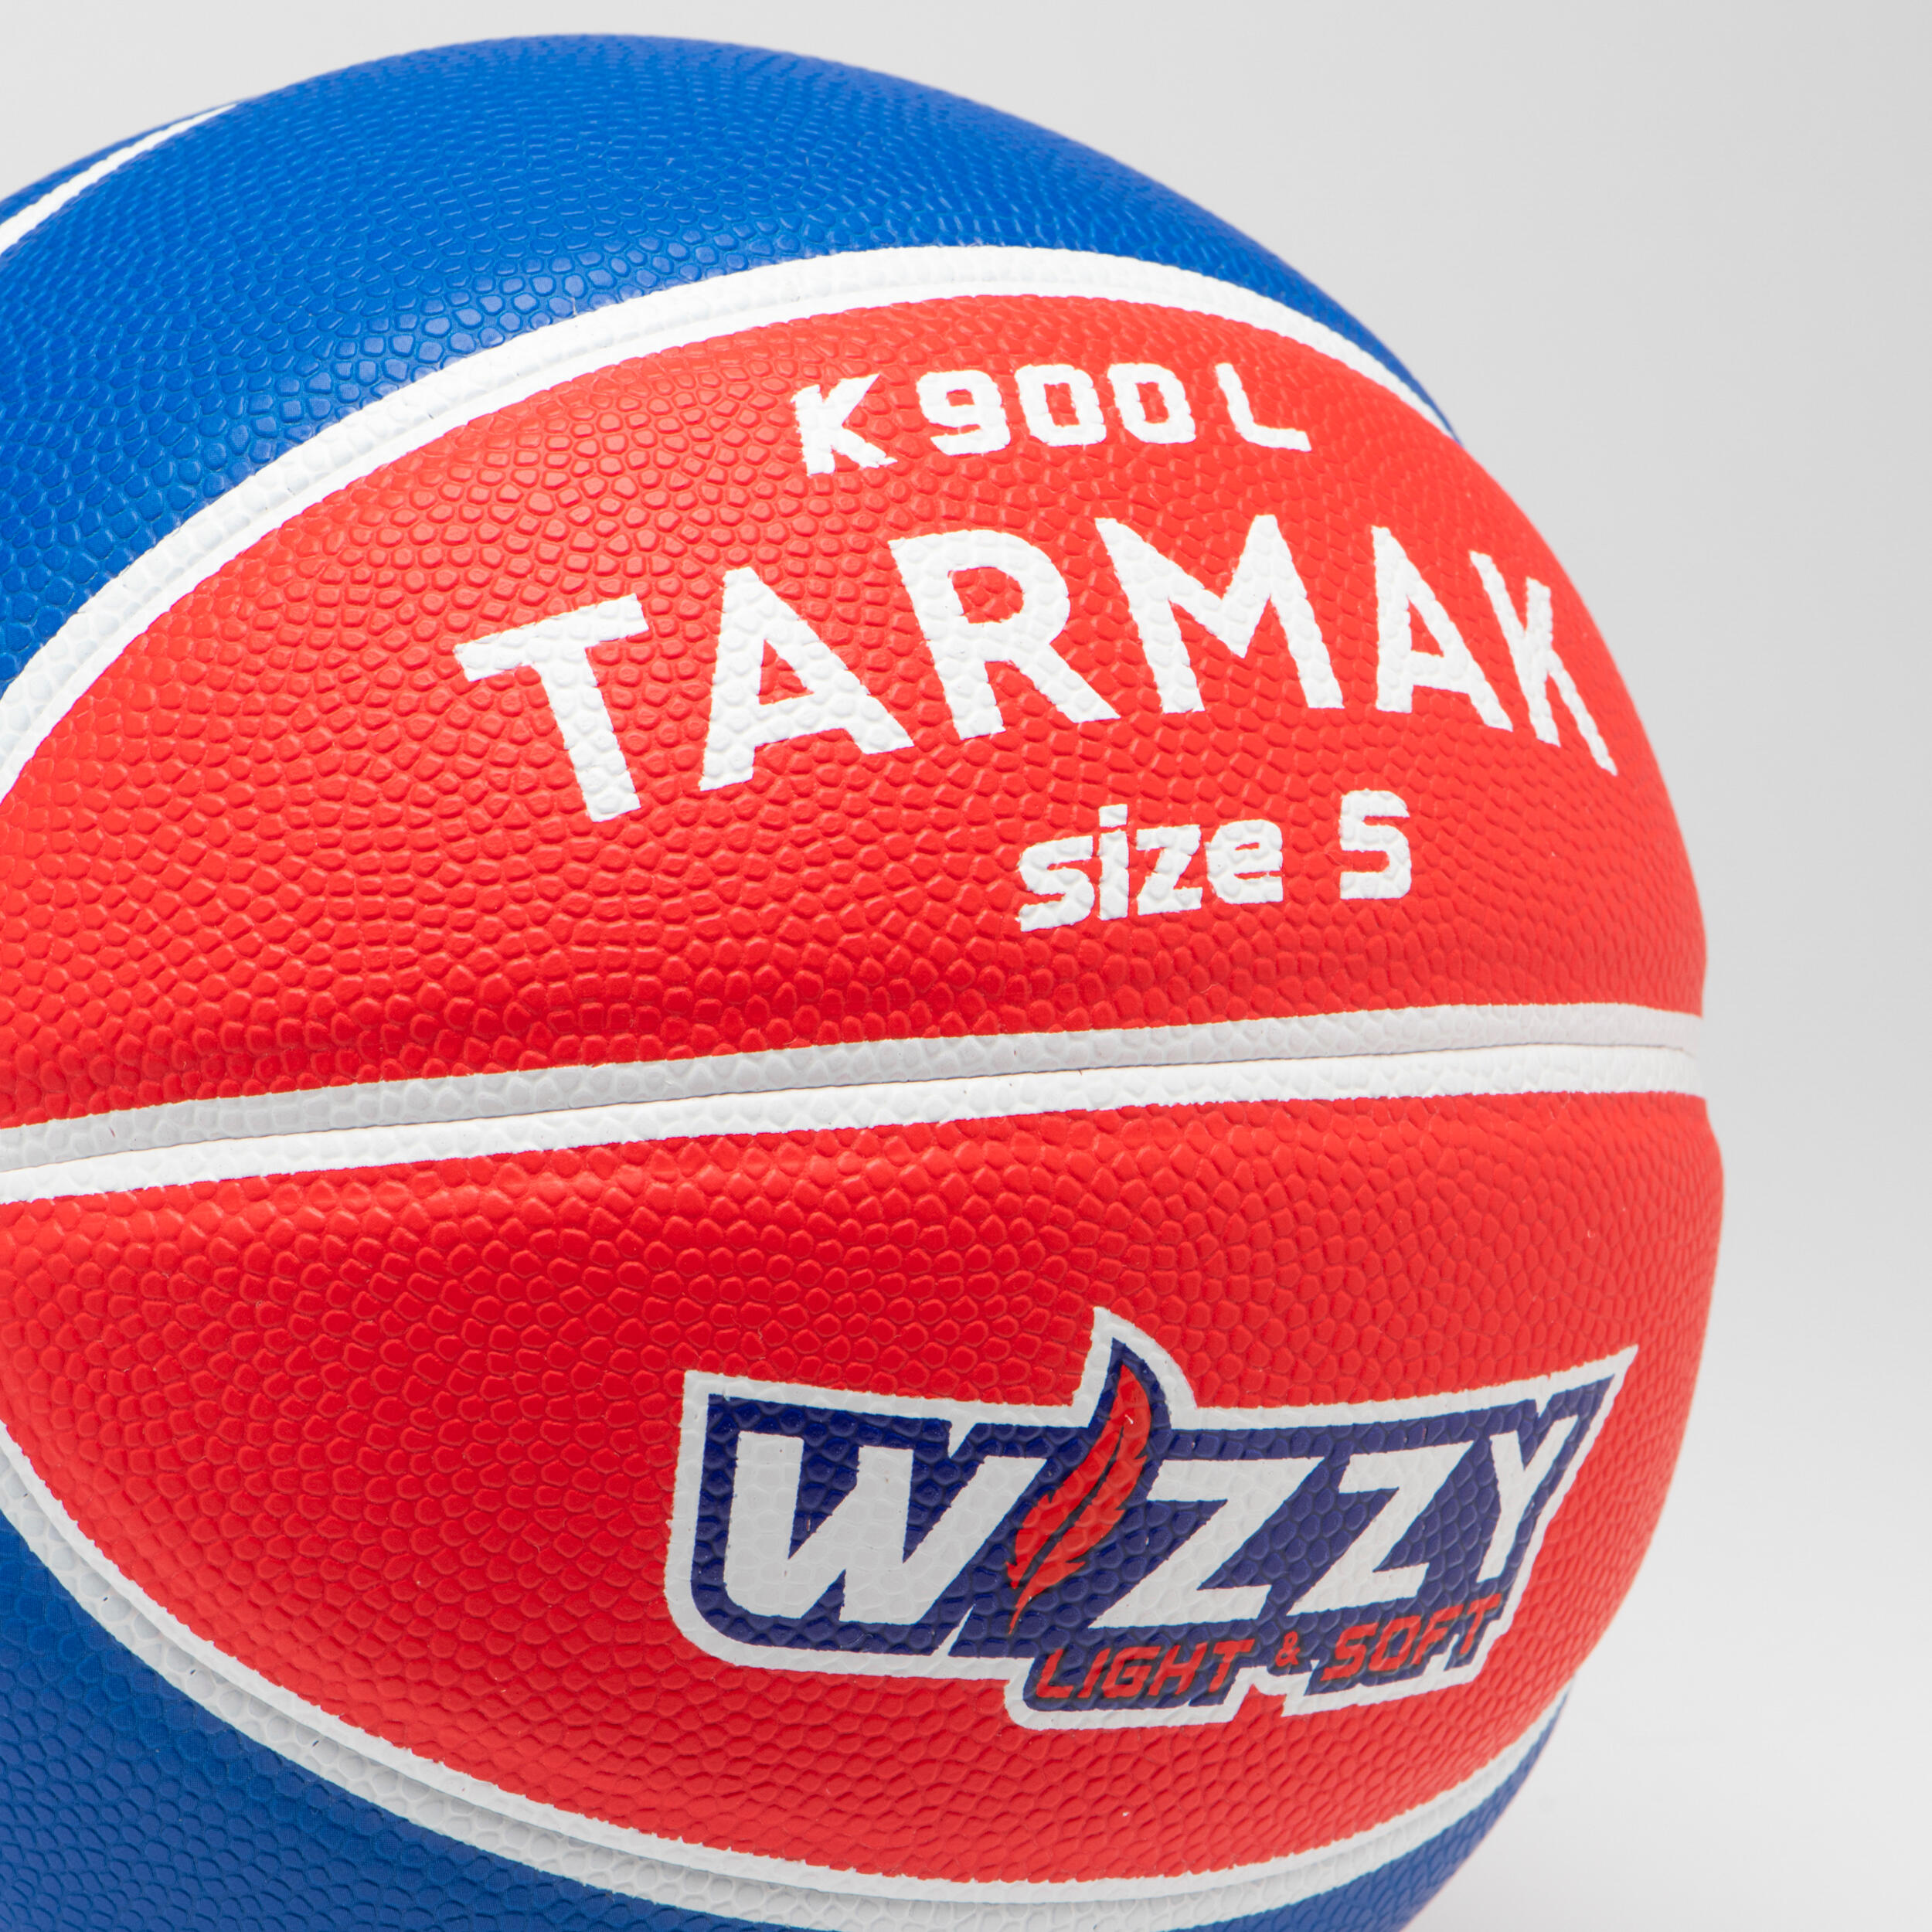 K900 Wizzy Ball - Blue/Red 6/8